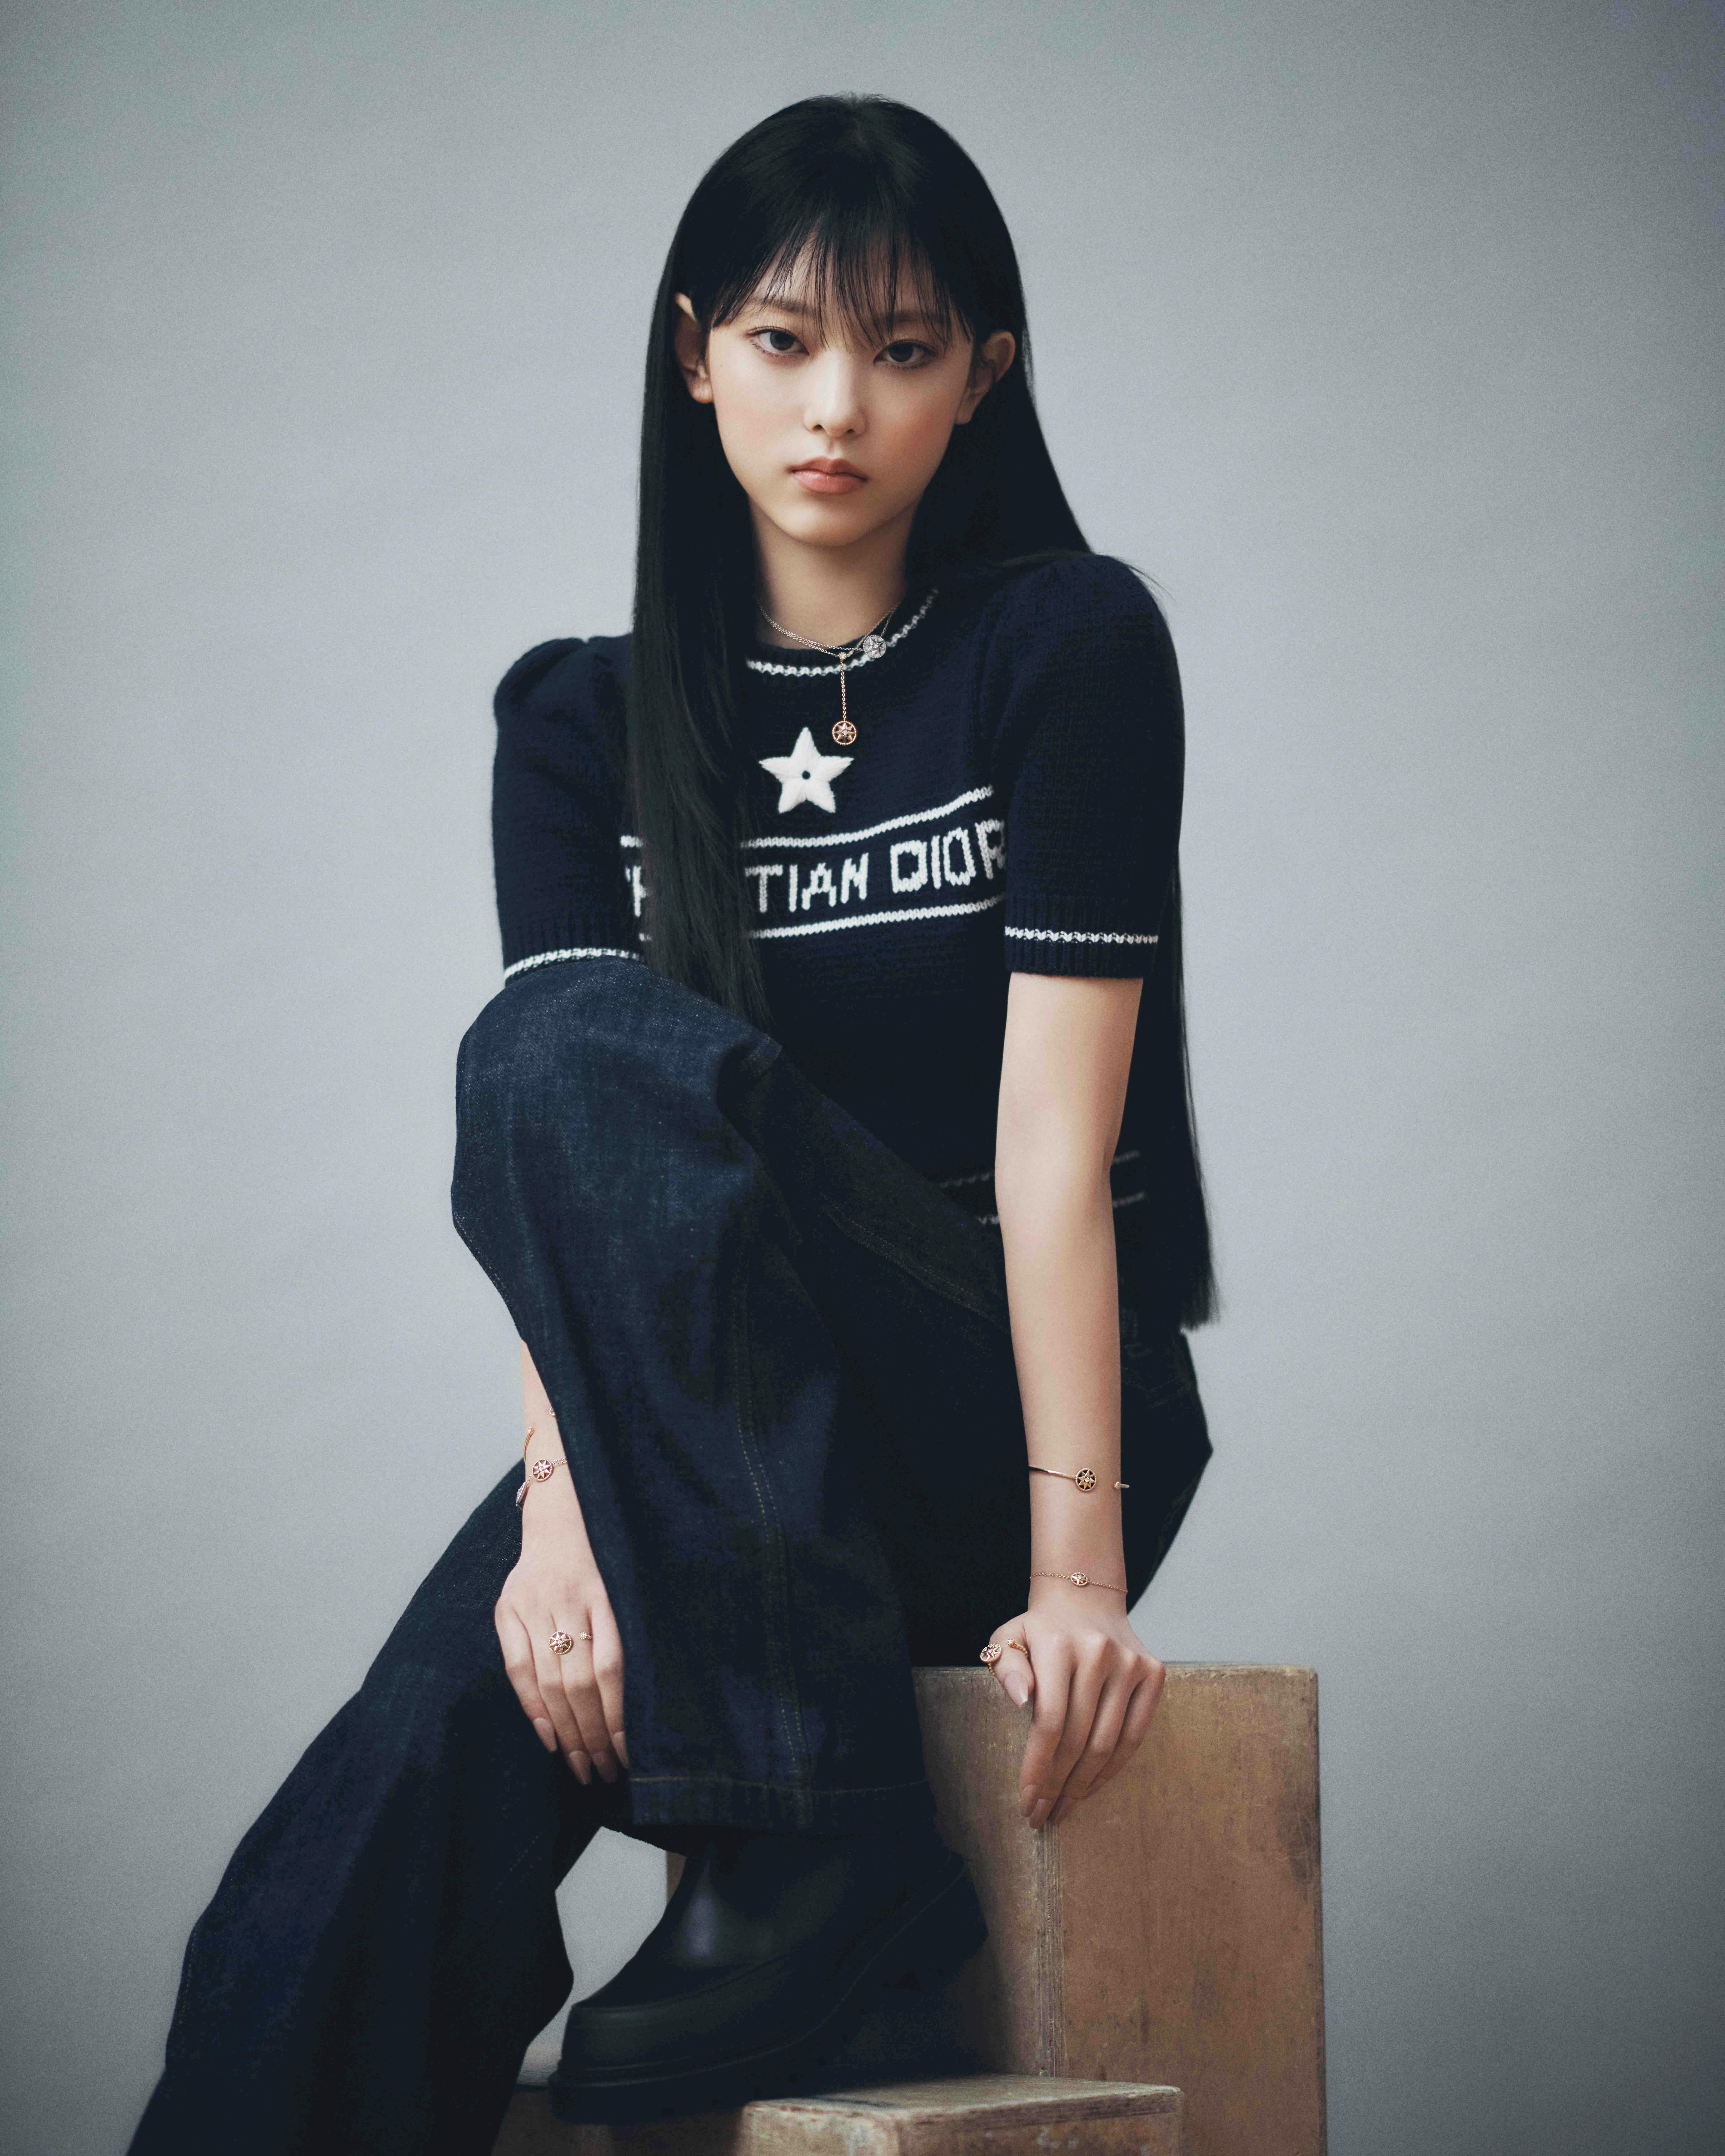 NewJeans Hyein style: The K-pop star's best Y2K outfits